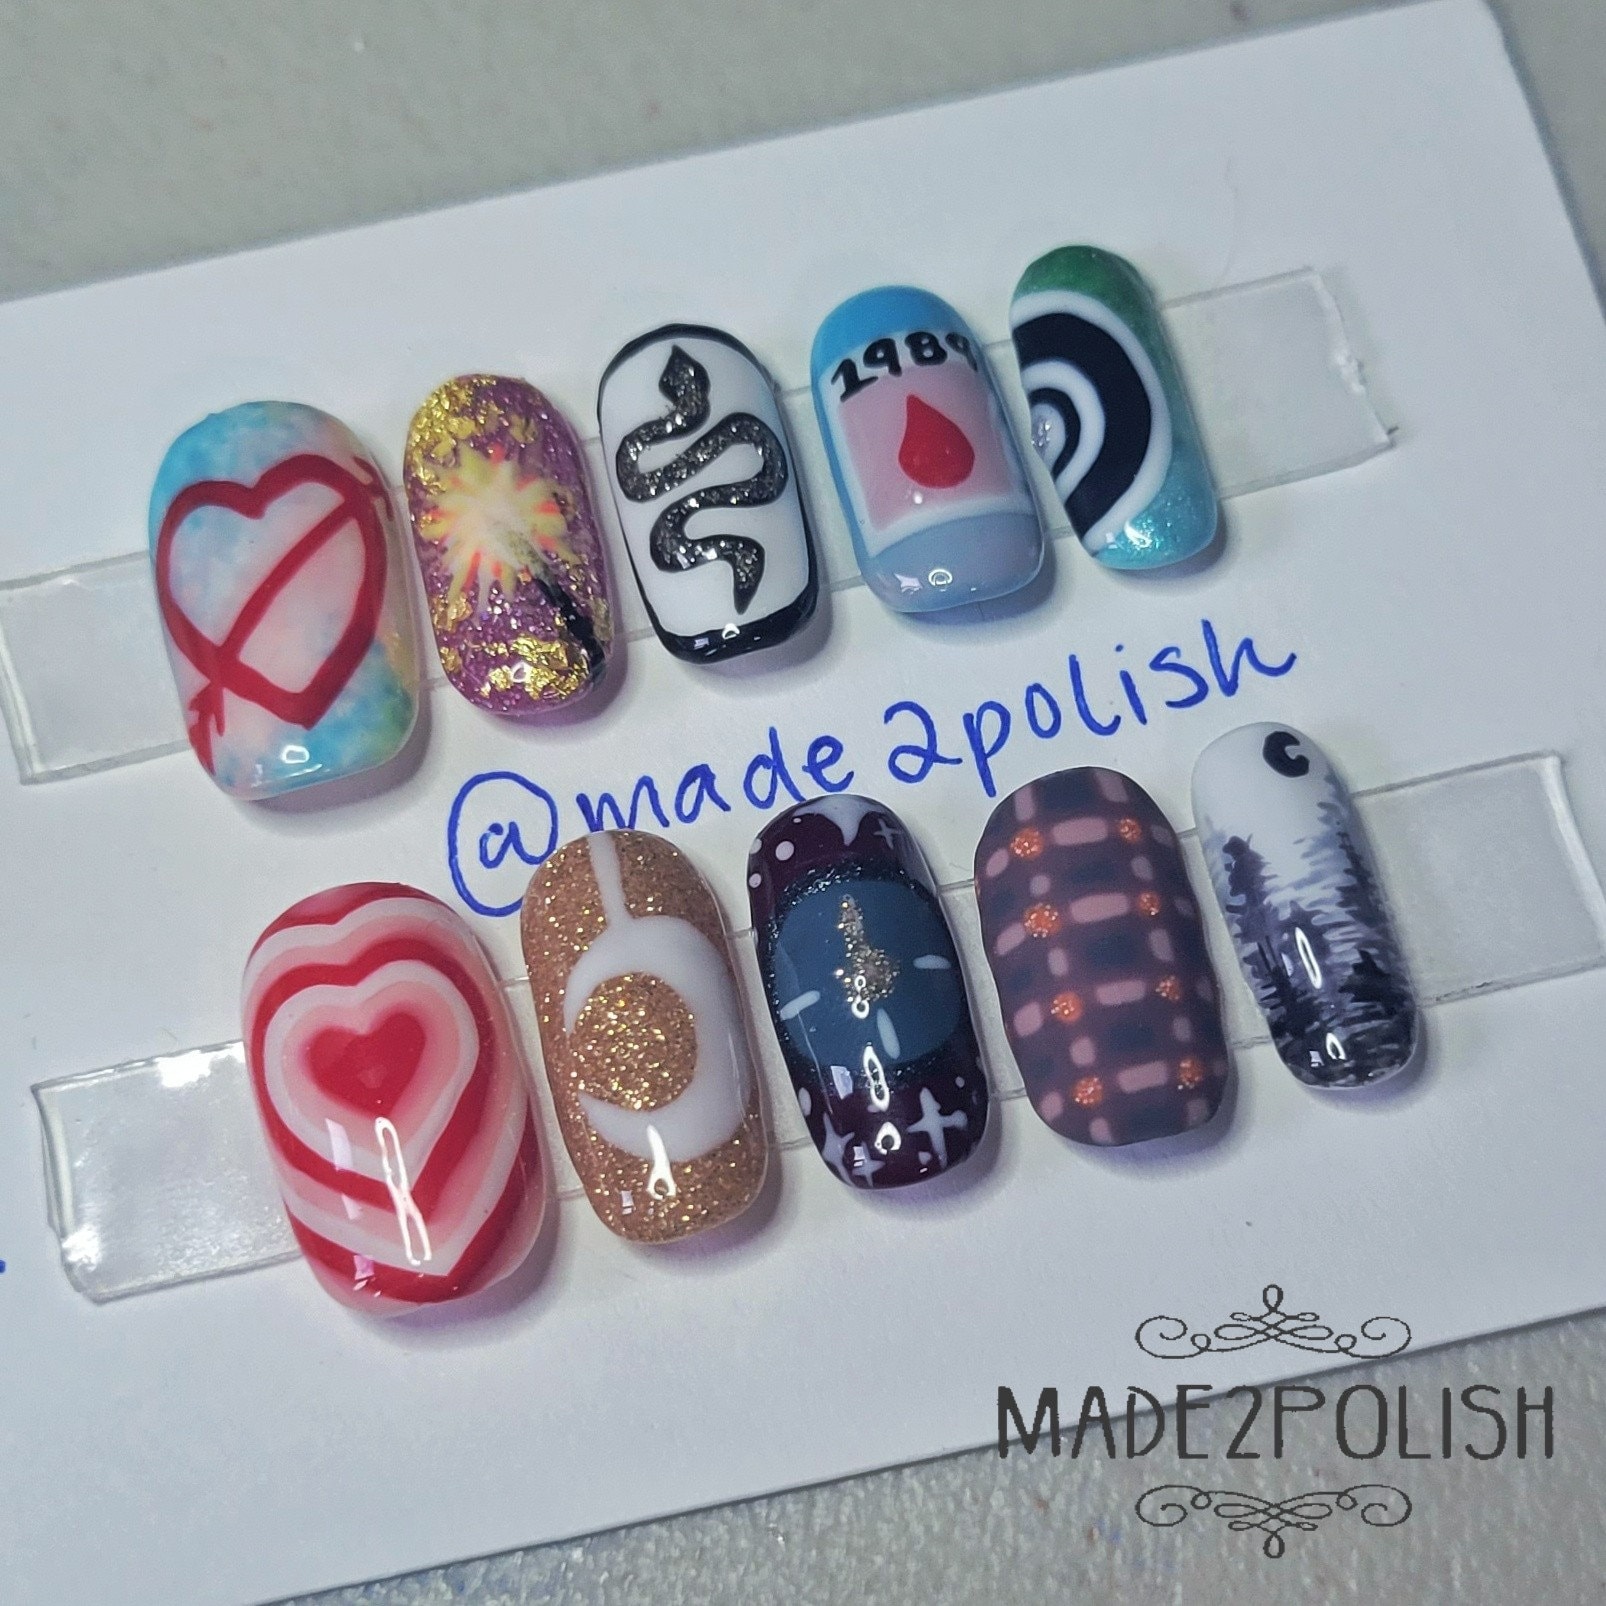 Nail Art By Margalit - Taylor swift nails! I do not own these! So  anyways,CALLING ALL NAIL ARTISTS! NAIL ART CONTEST! Rules: No copying, No  uploading from google, Make it your own!